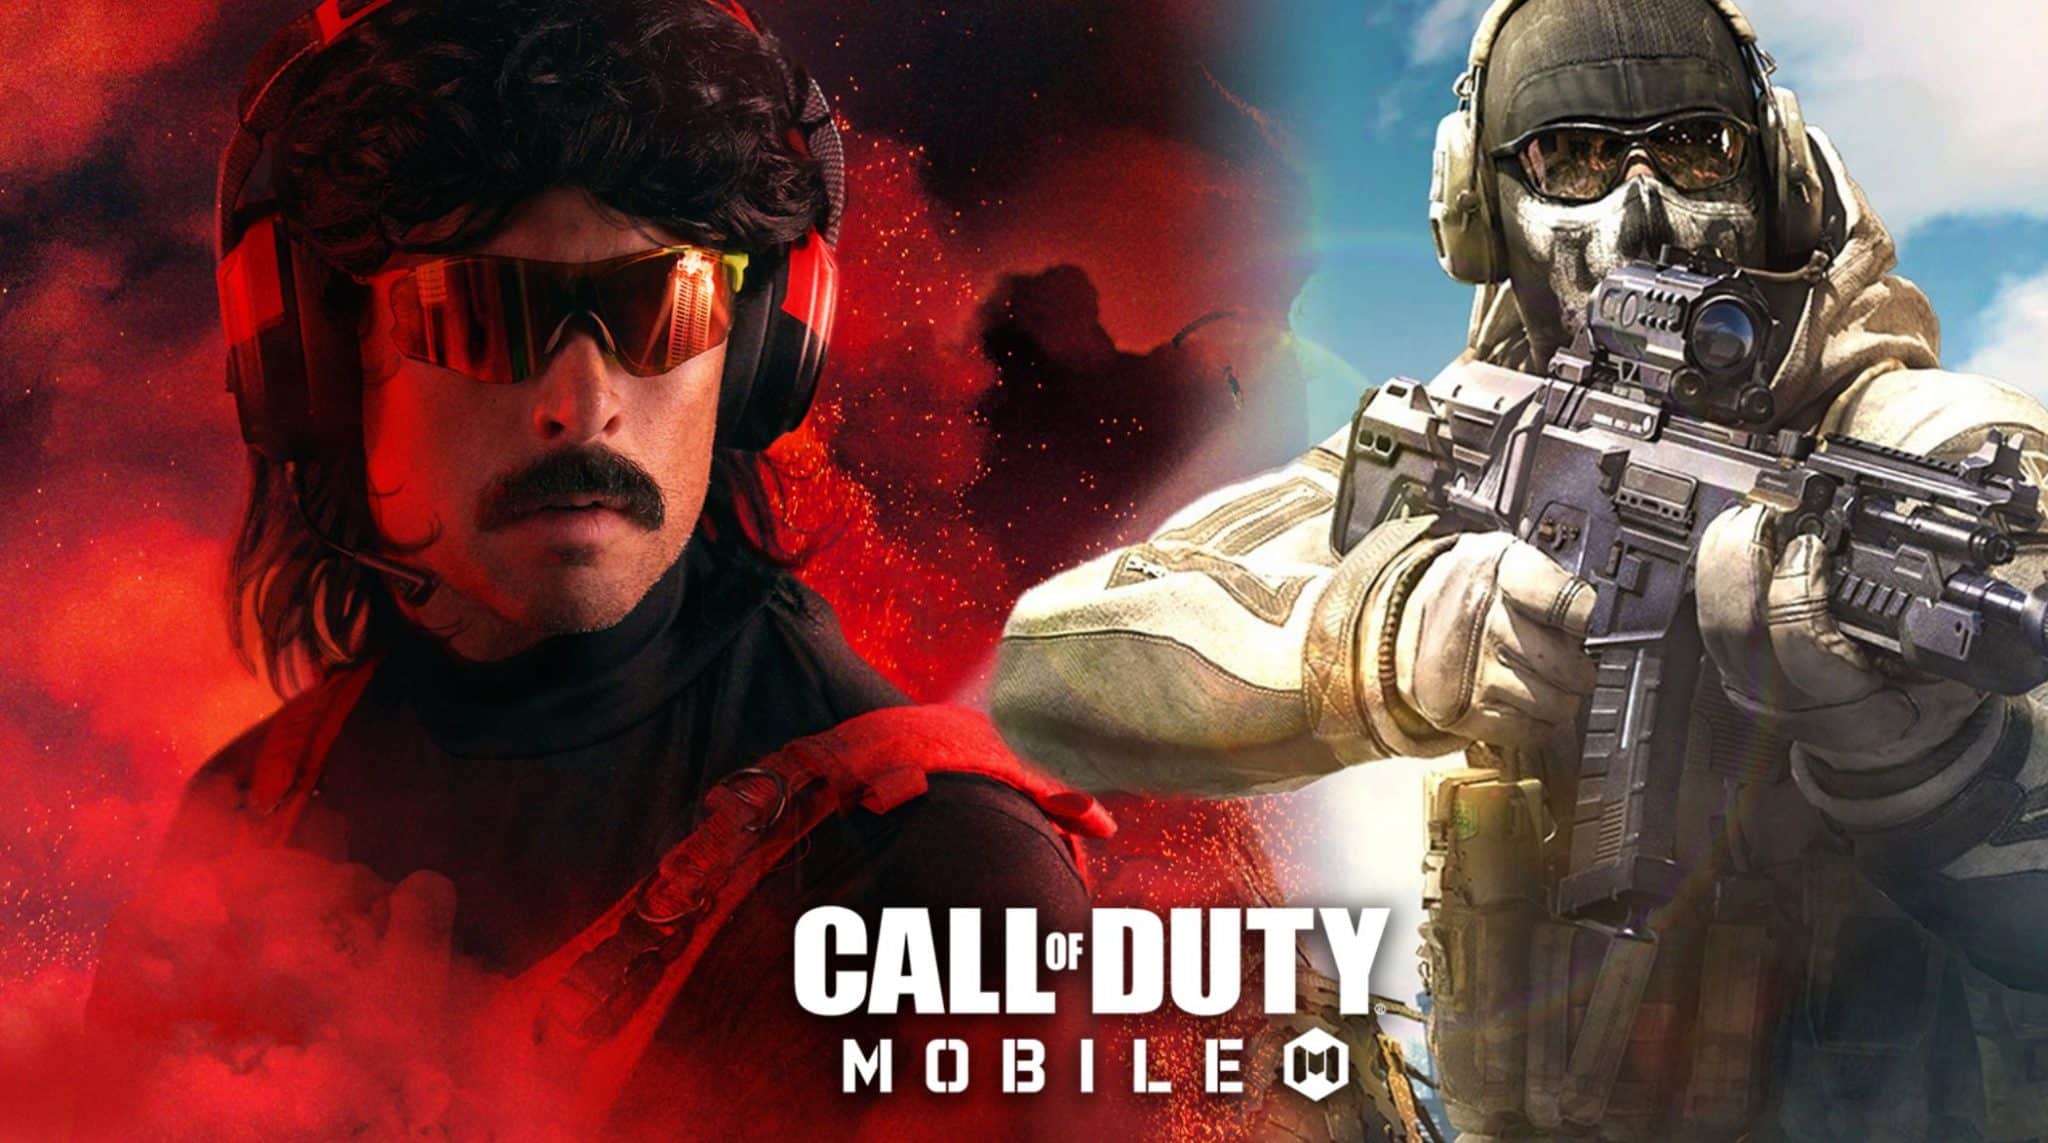 Call of Duty Mobile $2m World Championship 2021 announced: schedule &  format - Dexerto